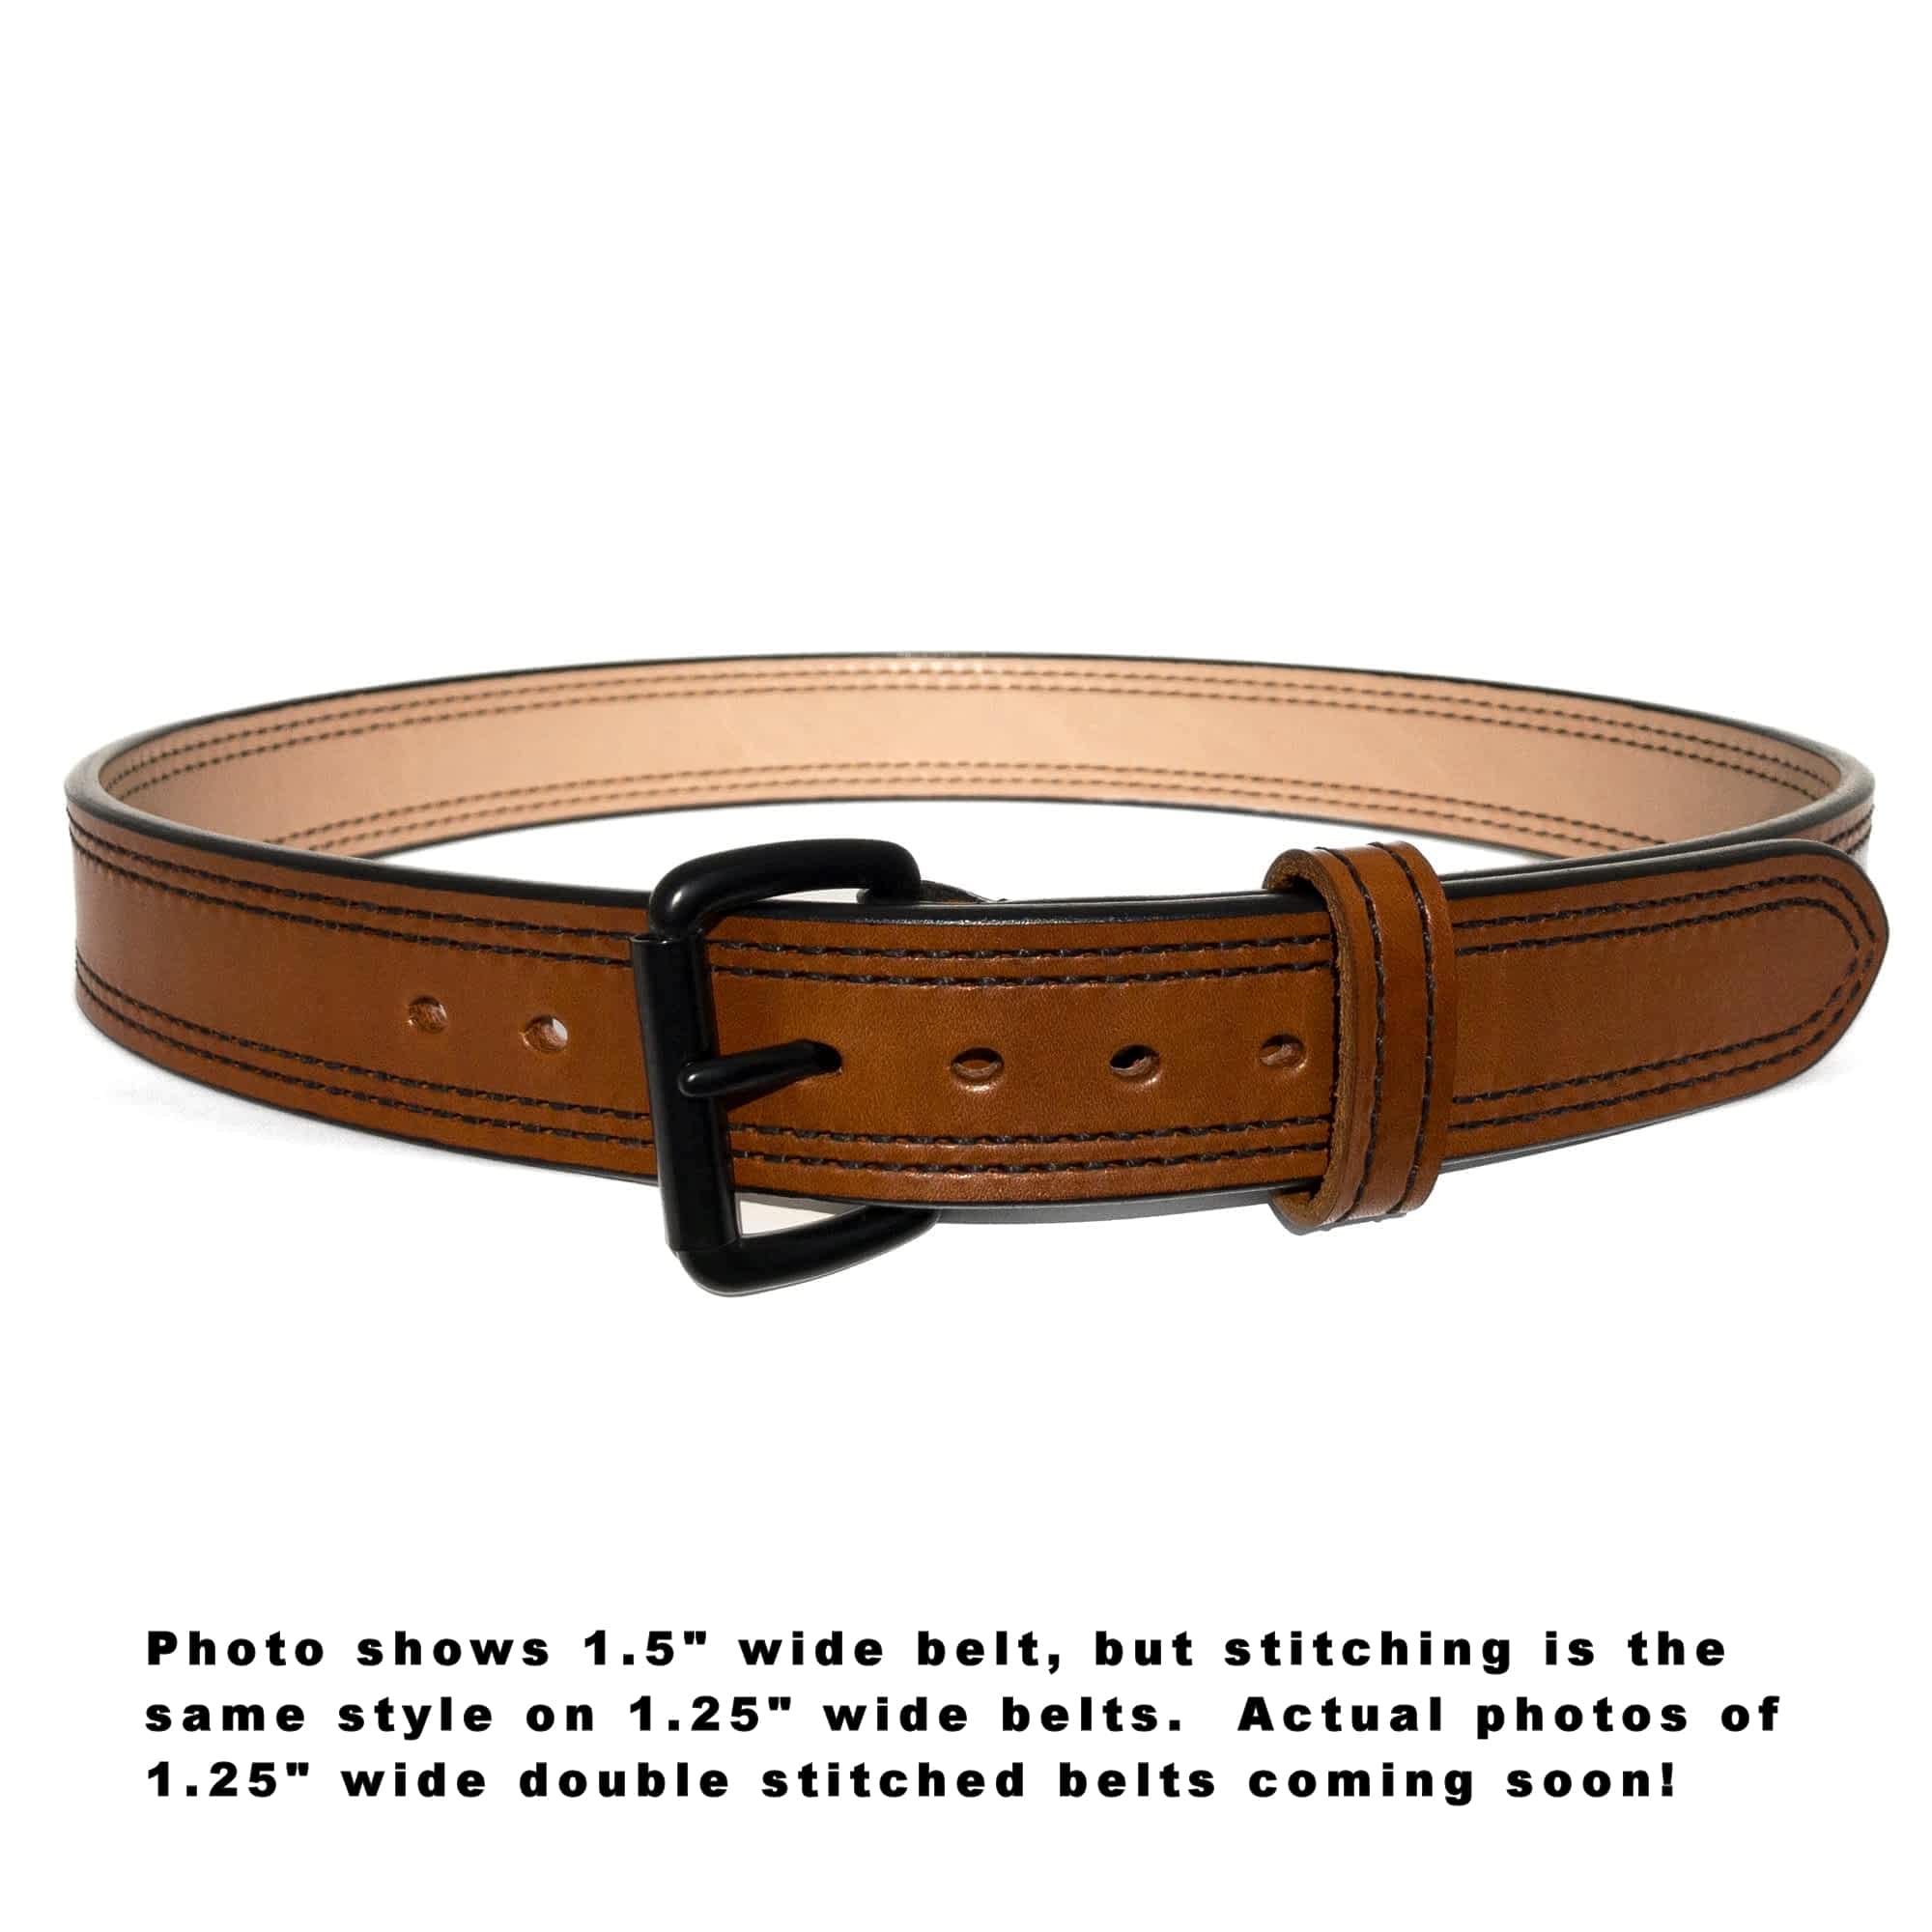 Perfect Fit 1.5 Inch Garrision Genuine Leather Belt American Made Black  Leather and Chrome Buckle